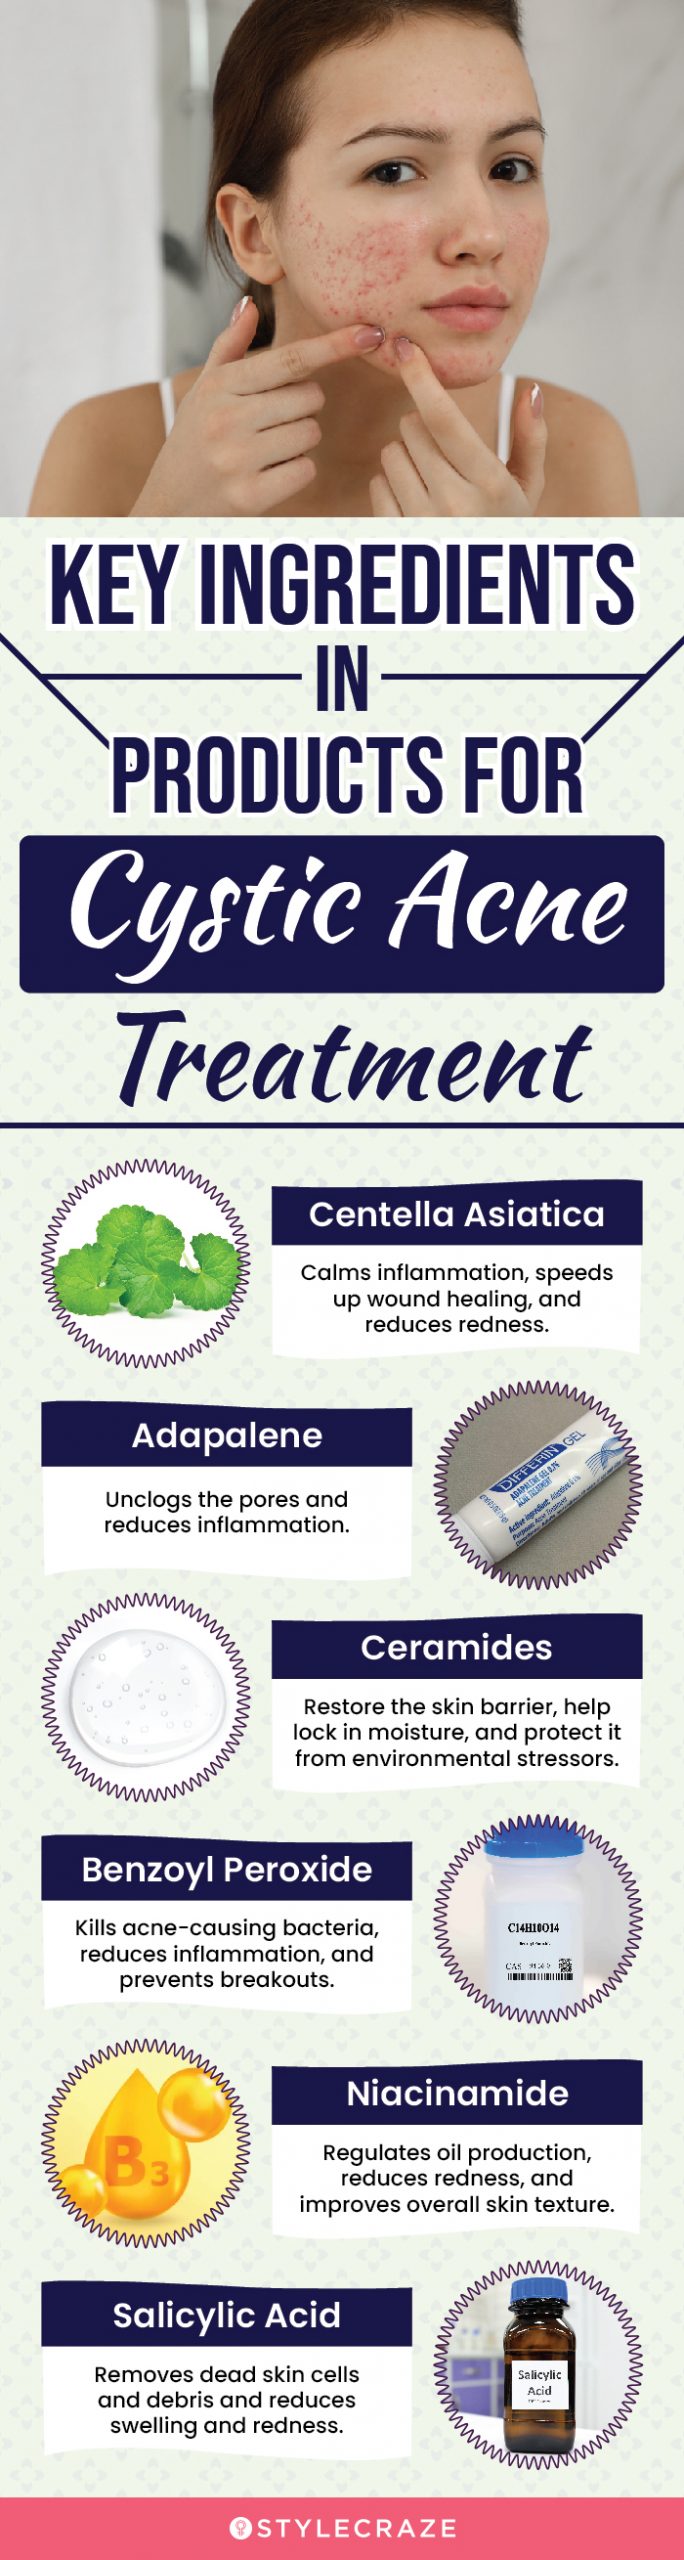 Key Ingredients In Products For Cystic Acne Treatment (infographic)